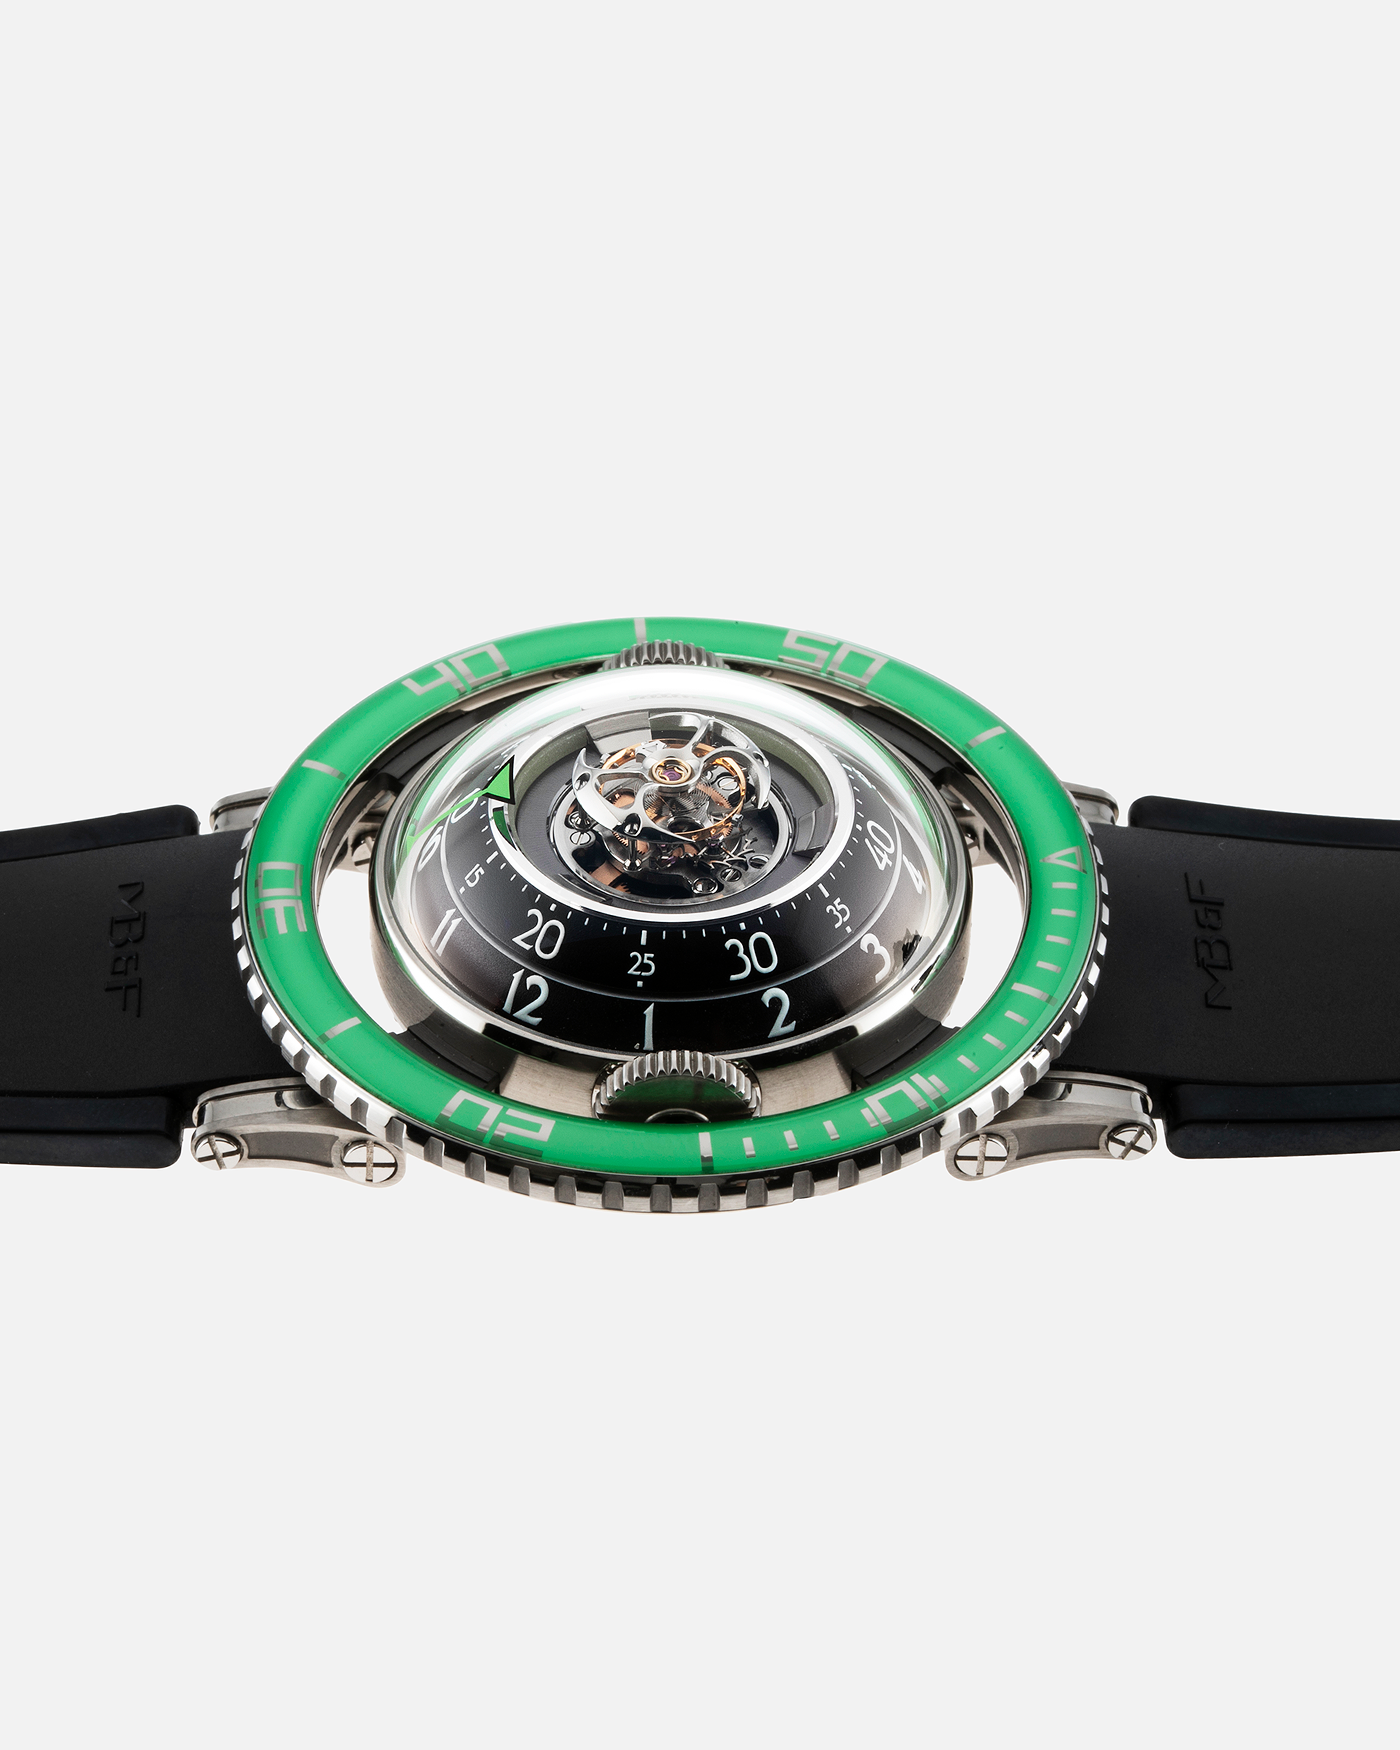 MB&F HM7 Aquapod Flying Tourbillon Independent Watch | S.Song 